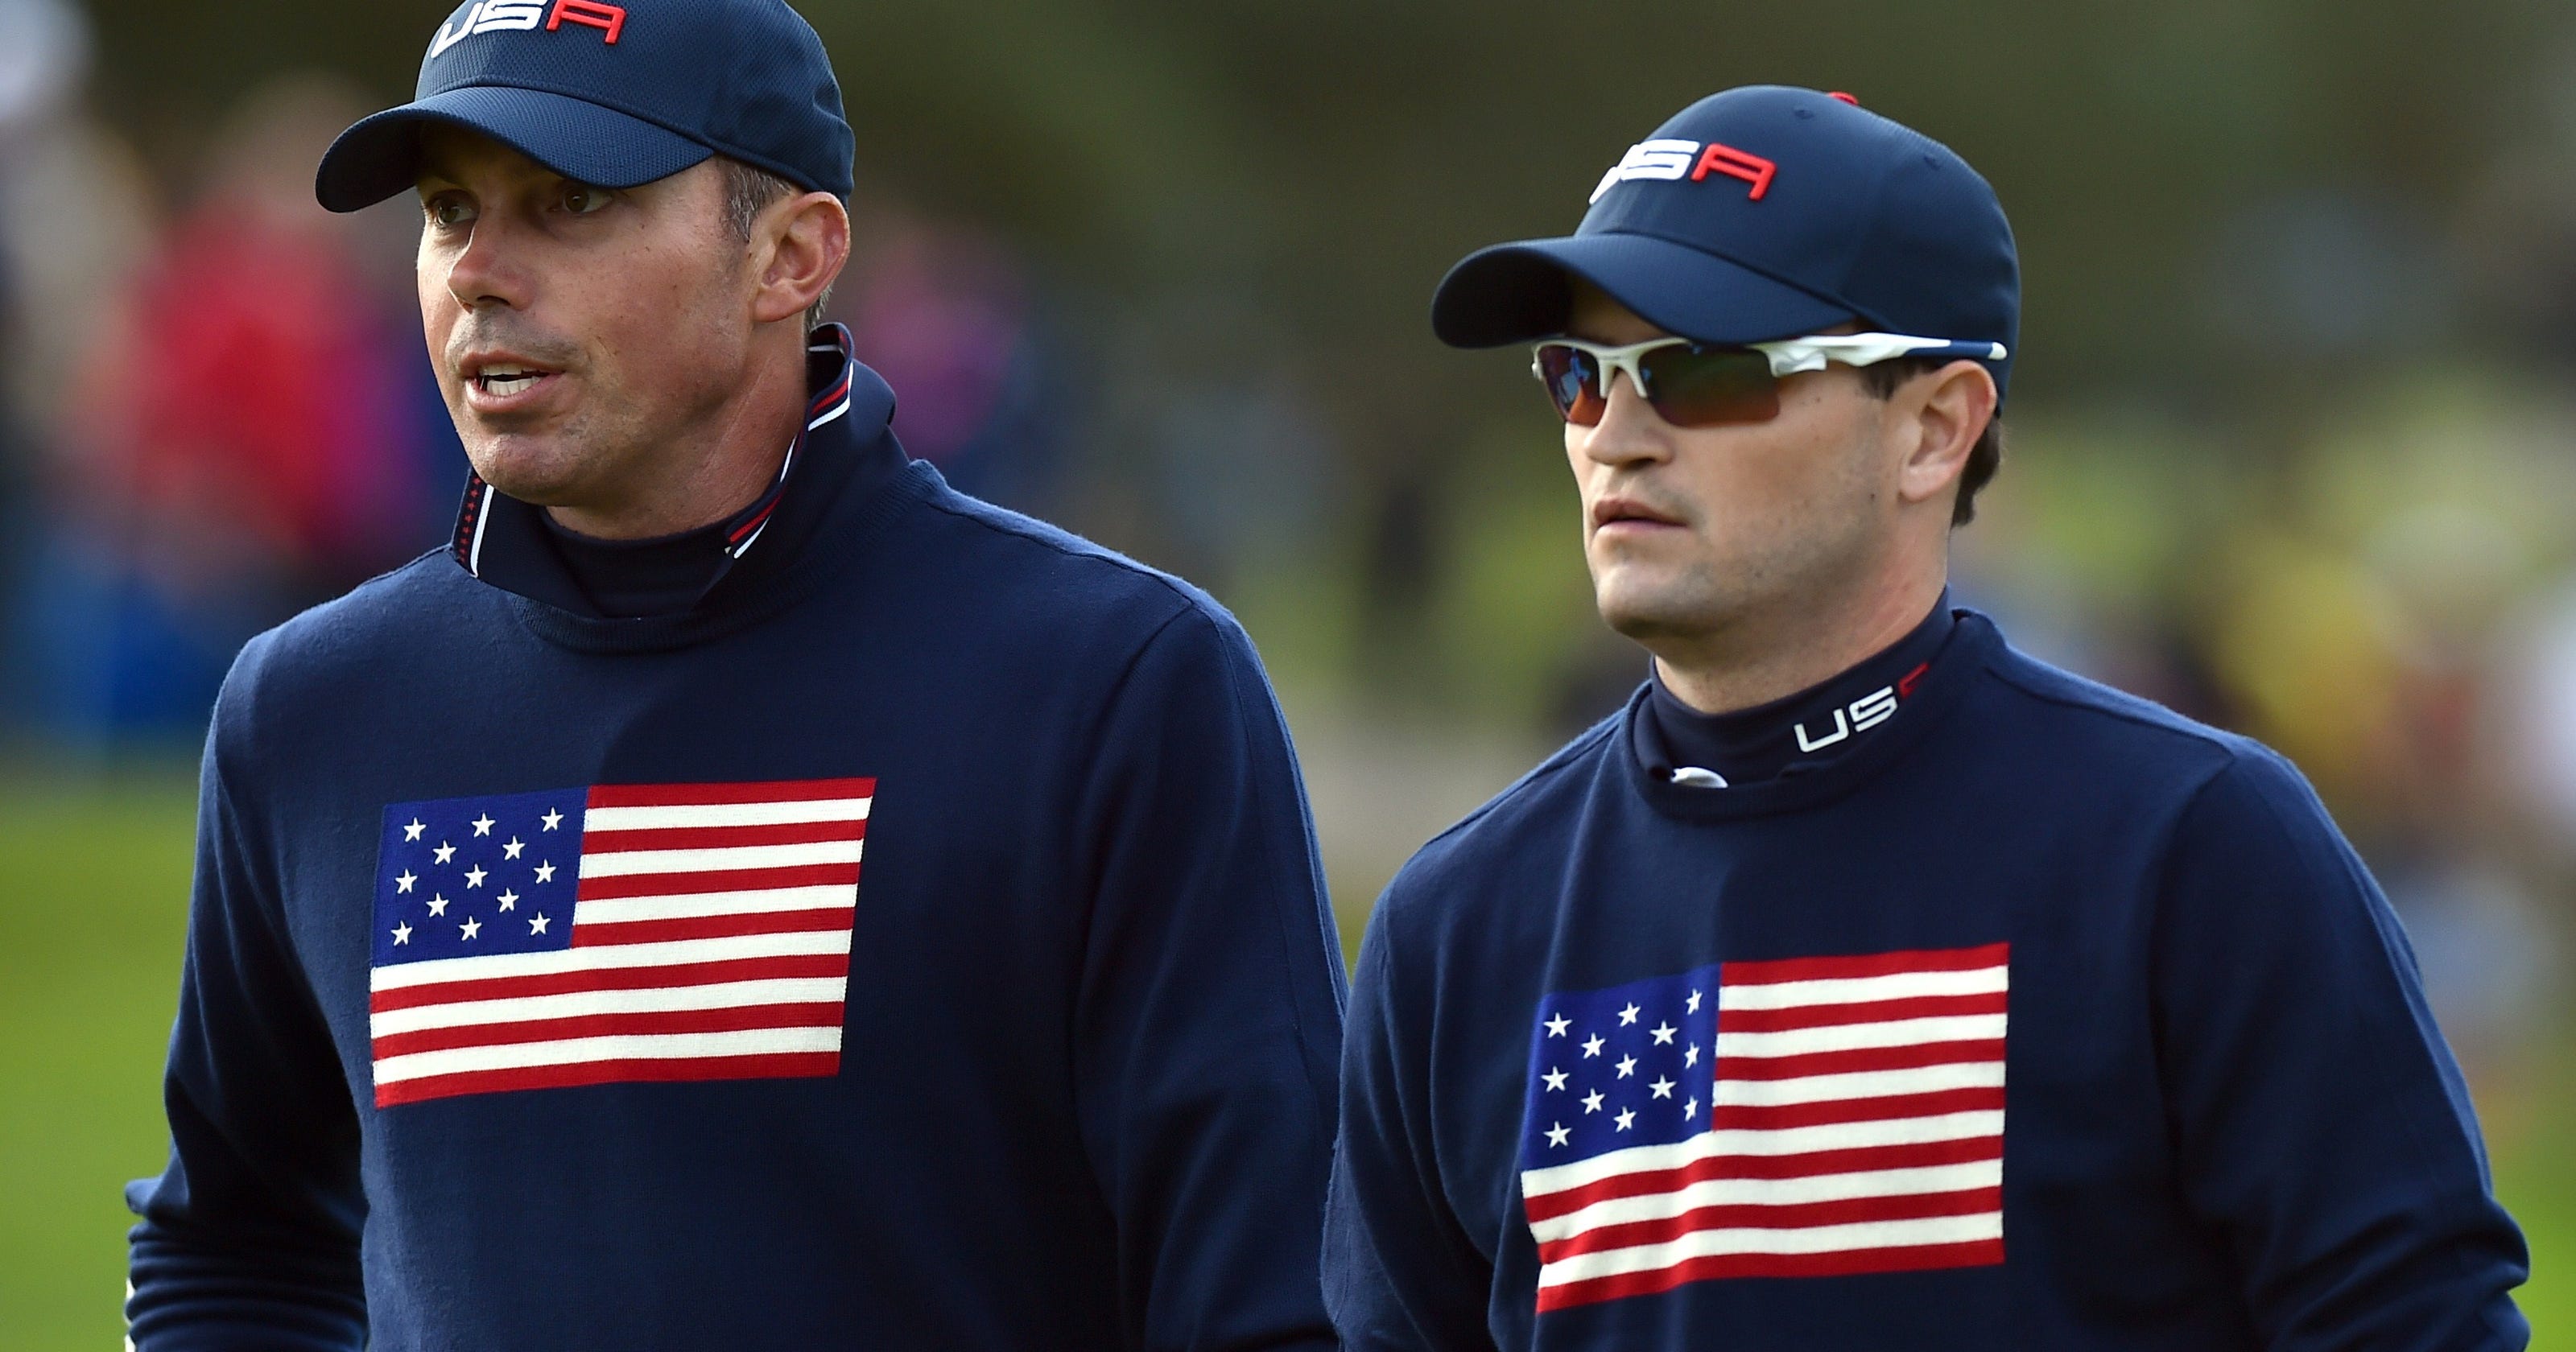 Ranking Team USA's Ryder Cup uniforms